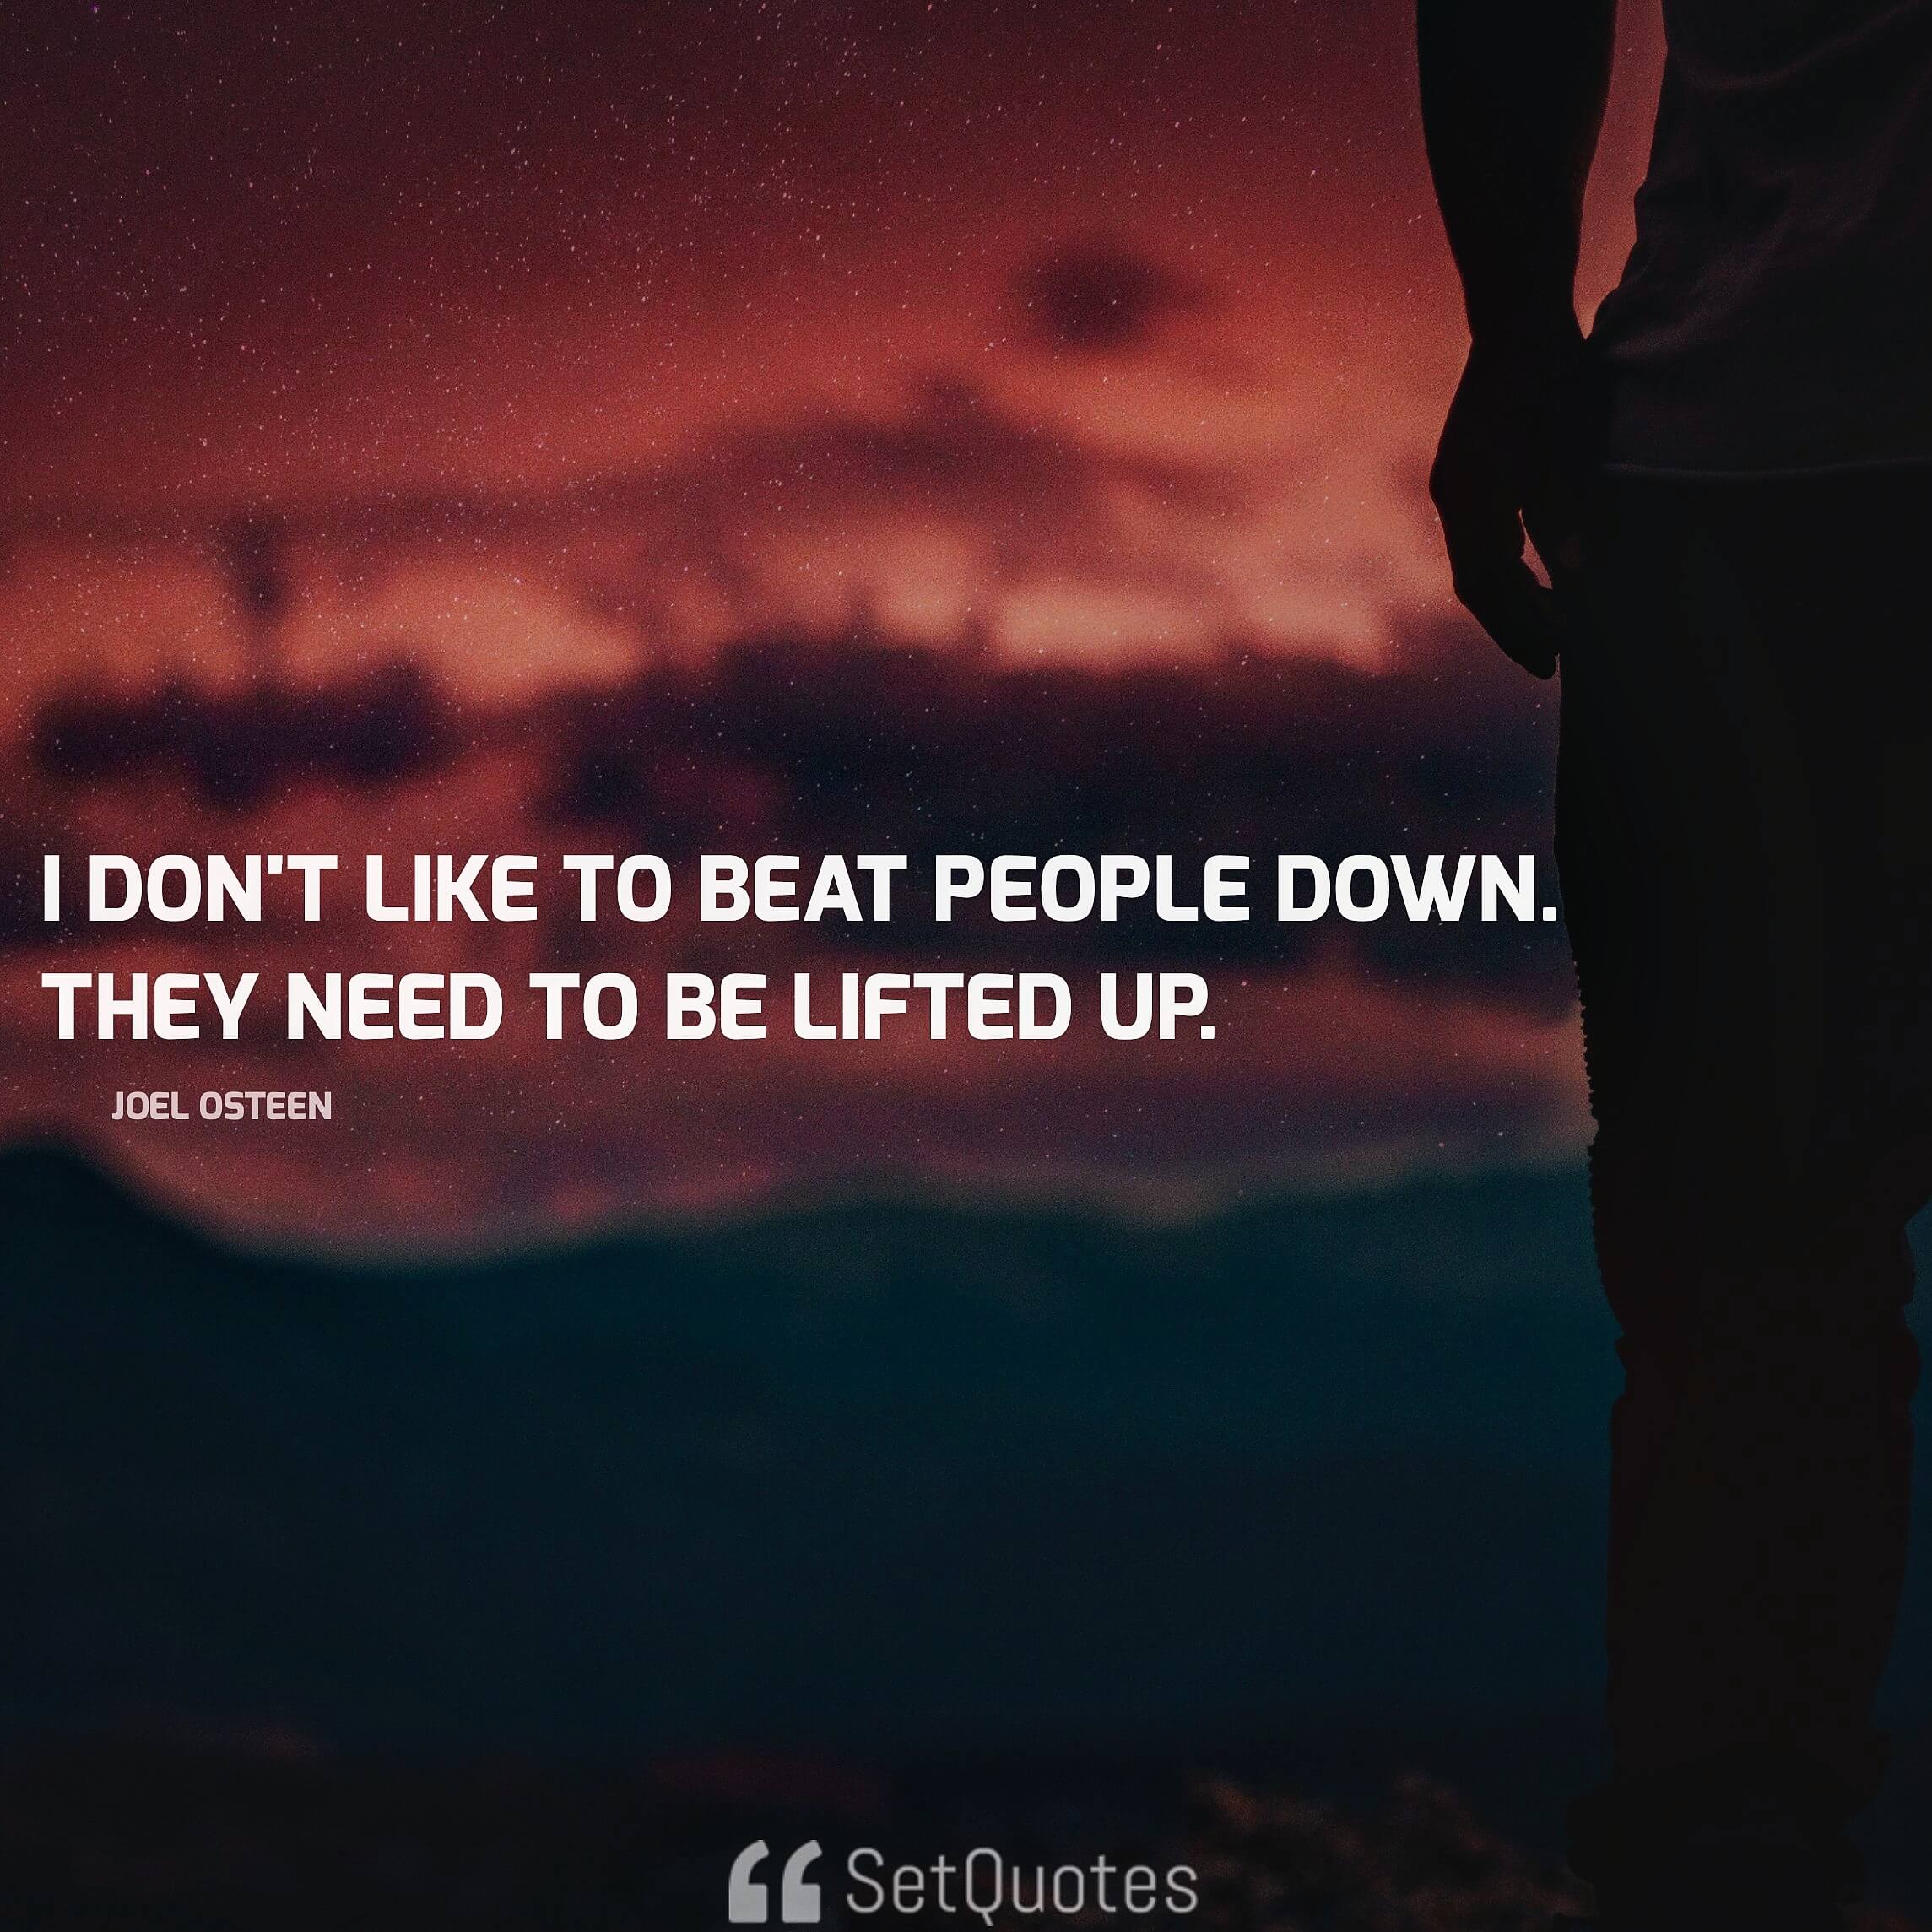 I don't like to beat people down. They need to be lifted up. - Joel Osteen